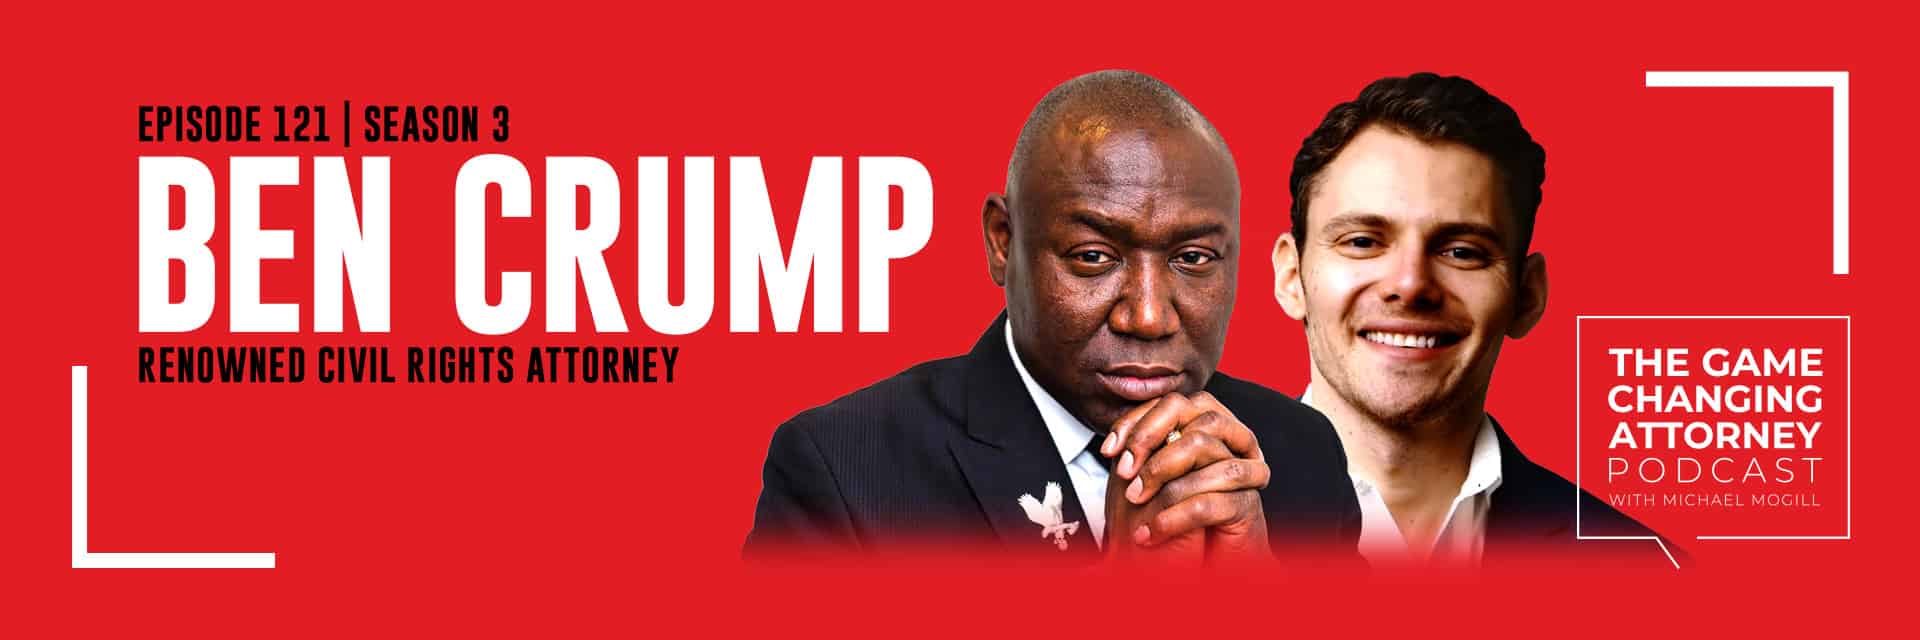 The Game Changing Attorney Podcast: Ben Crump